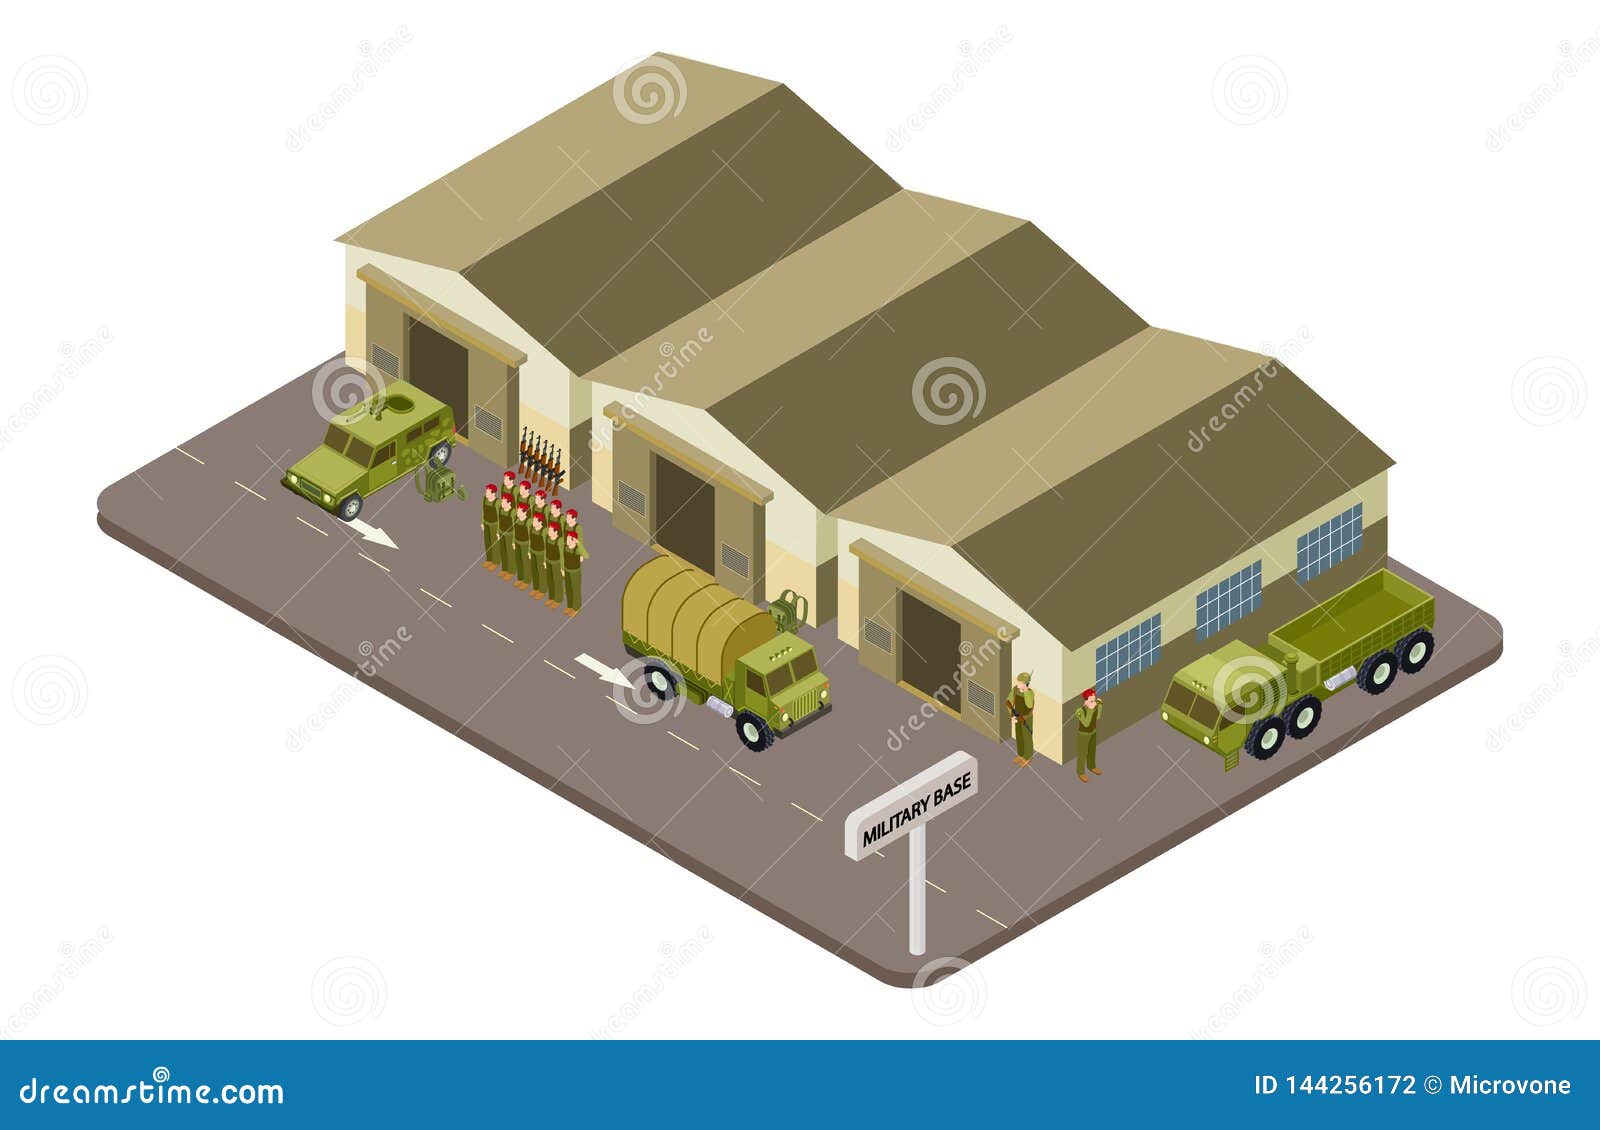 military base with soldiers and military cars isometric  concept